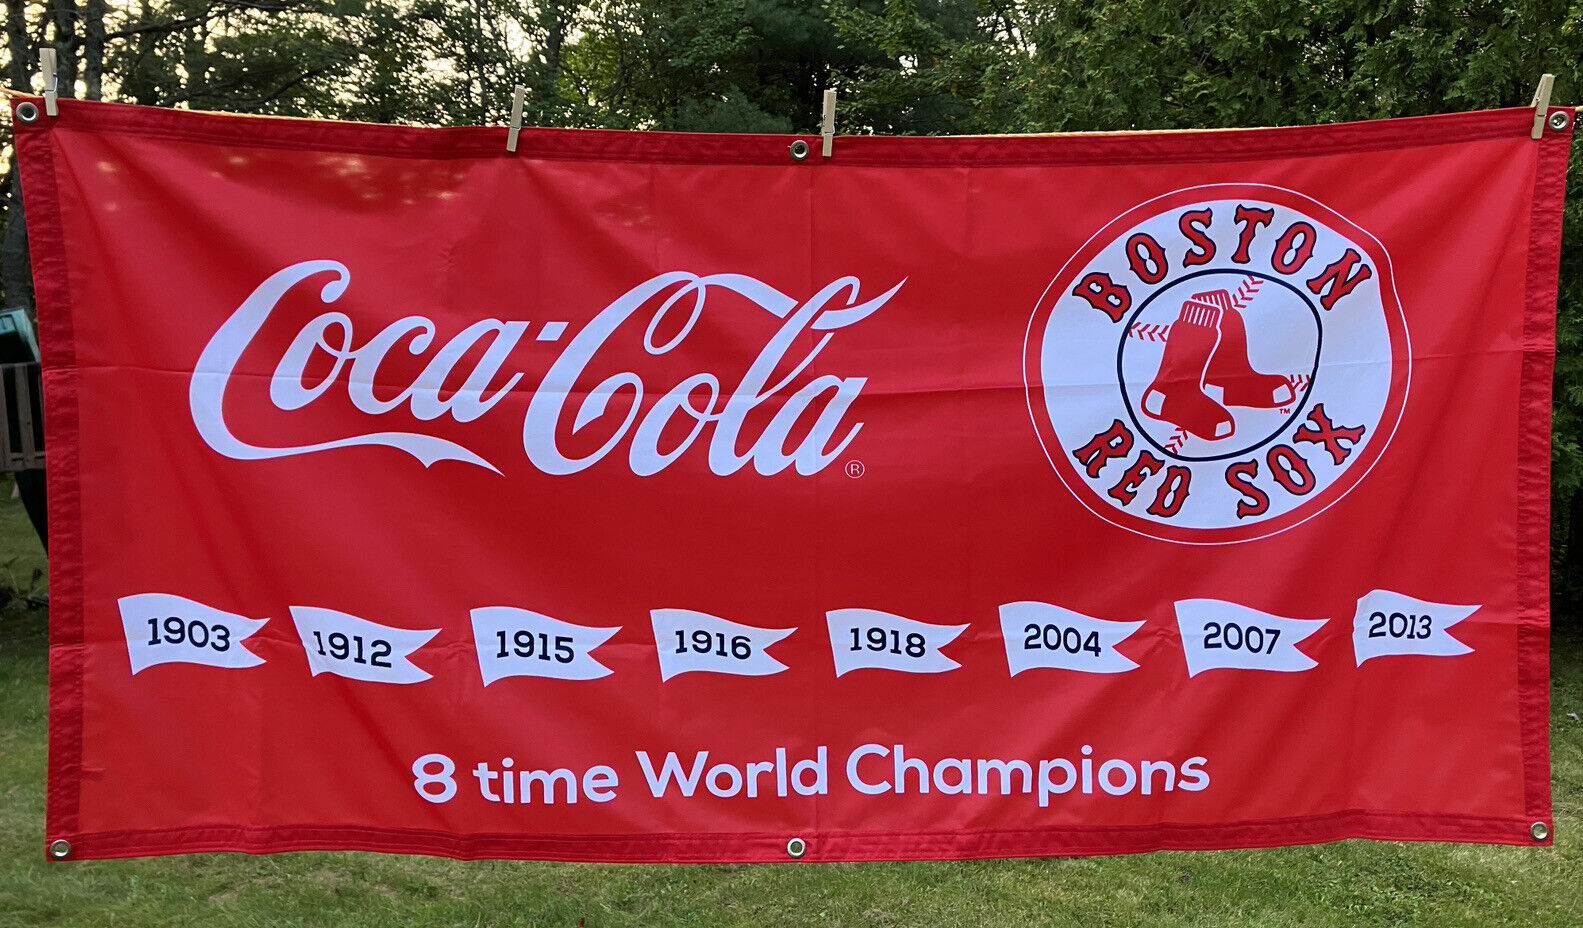 New Boston Red Sox 8X World Champions Coca Cola Banner Sign 72x36 In POP Advert